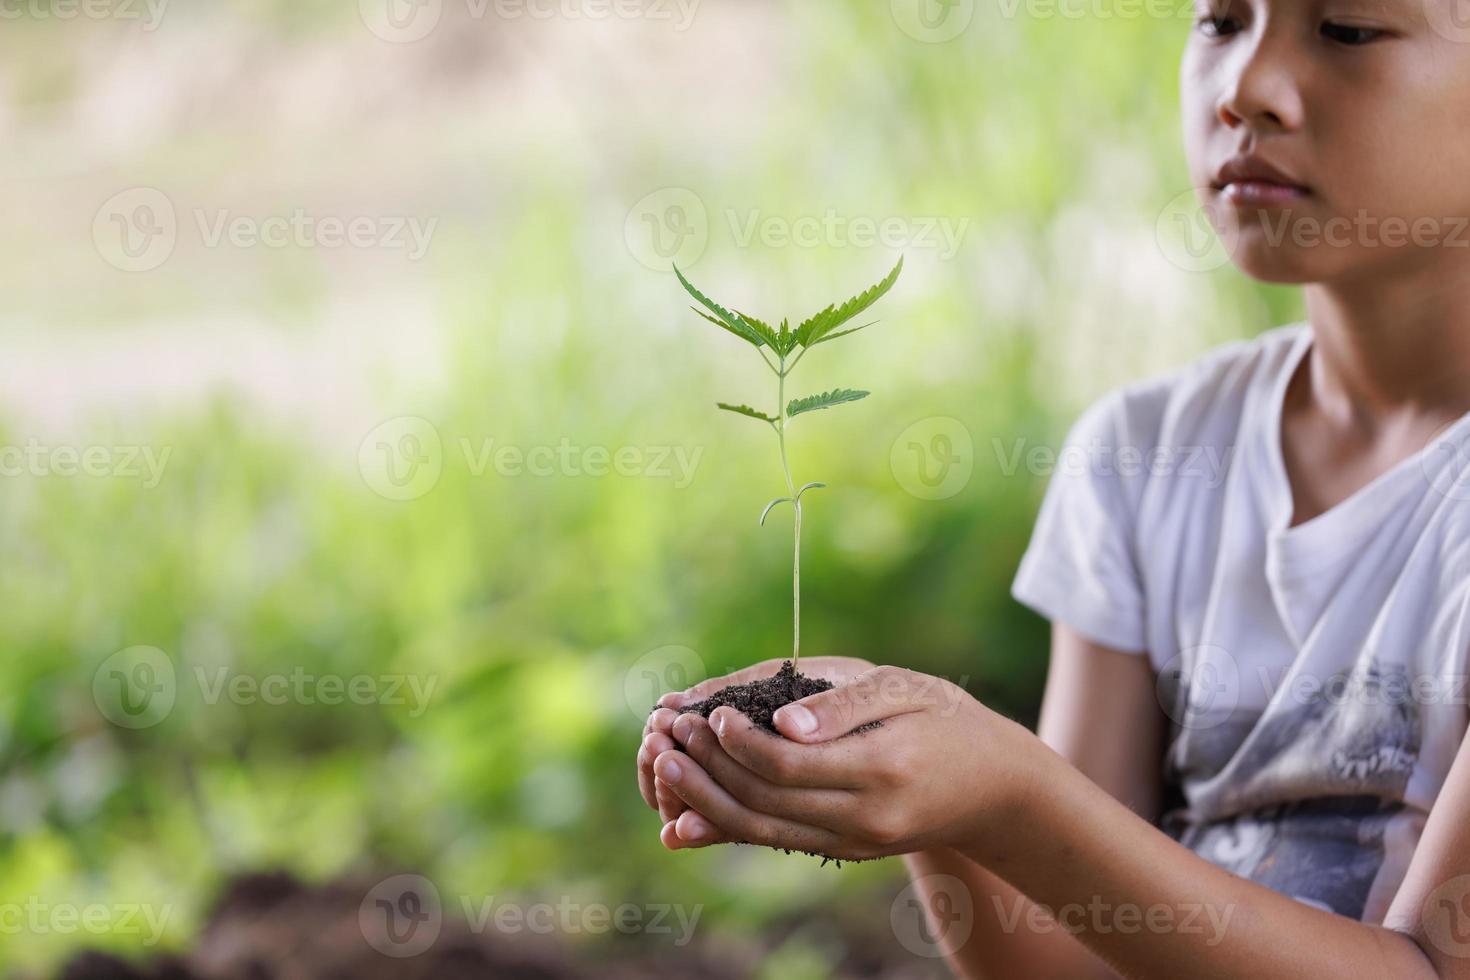 Environment Earth Day, Child holding a small tree in hand on nature field grass Forest conservation concept, plant trees to reduce global warming. photo